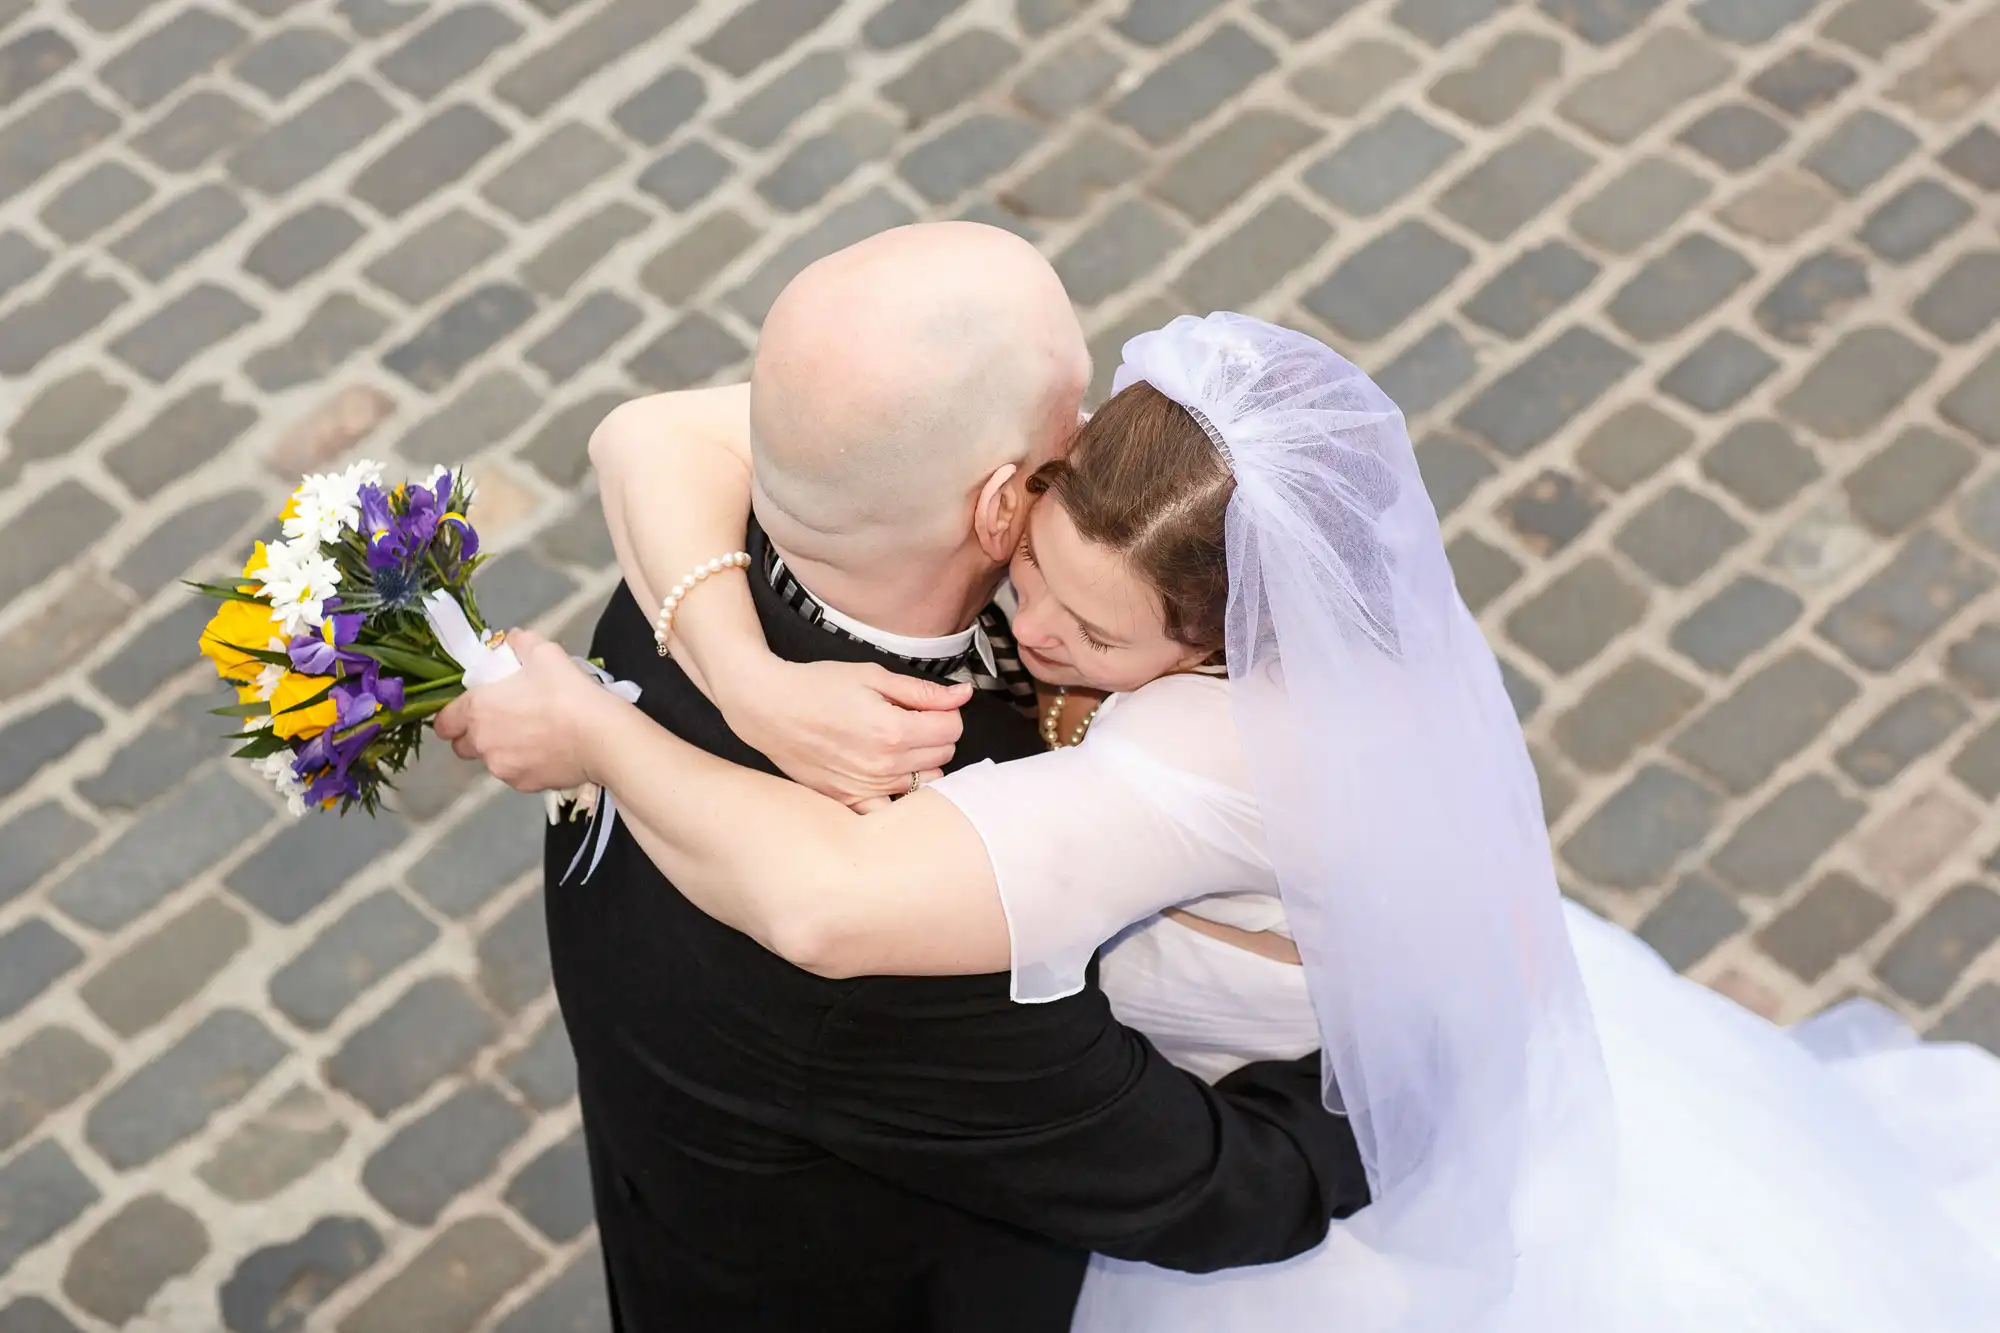 Bald groom in a black vest hugs a bride in a white dress and veil, holding a colorful bouquet, top-down view on a cobblestone street.